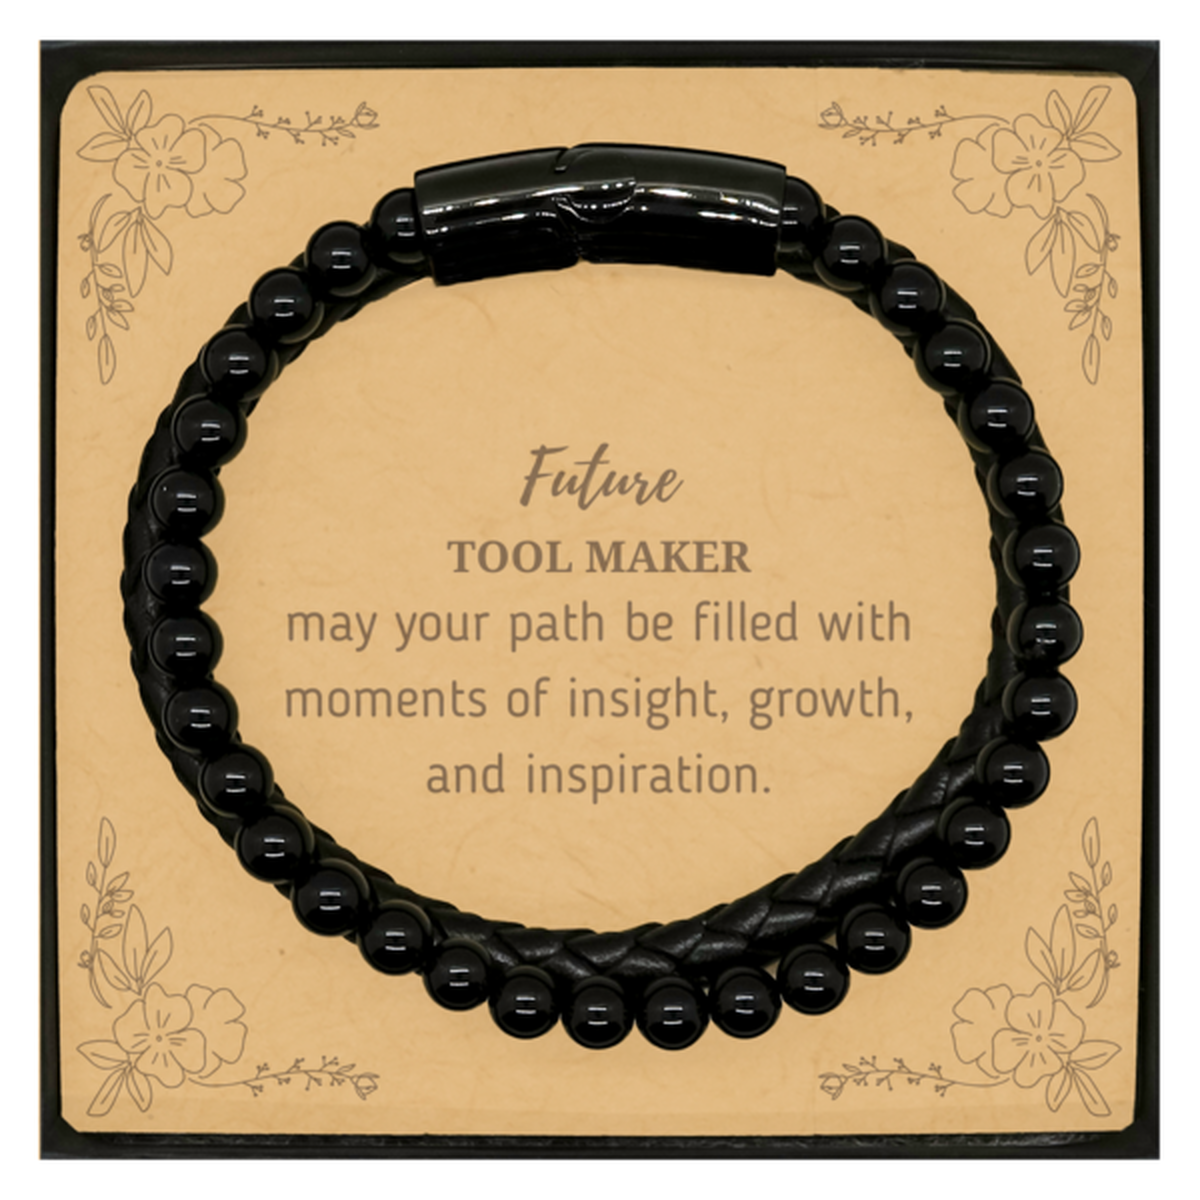 Future Tool Maker Gifts, May your path be filled with moments of insight, Graduation Gifts for New Tool Maker, Christmas Unique Stone Leather Bracelets For Men, Women, Friends